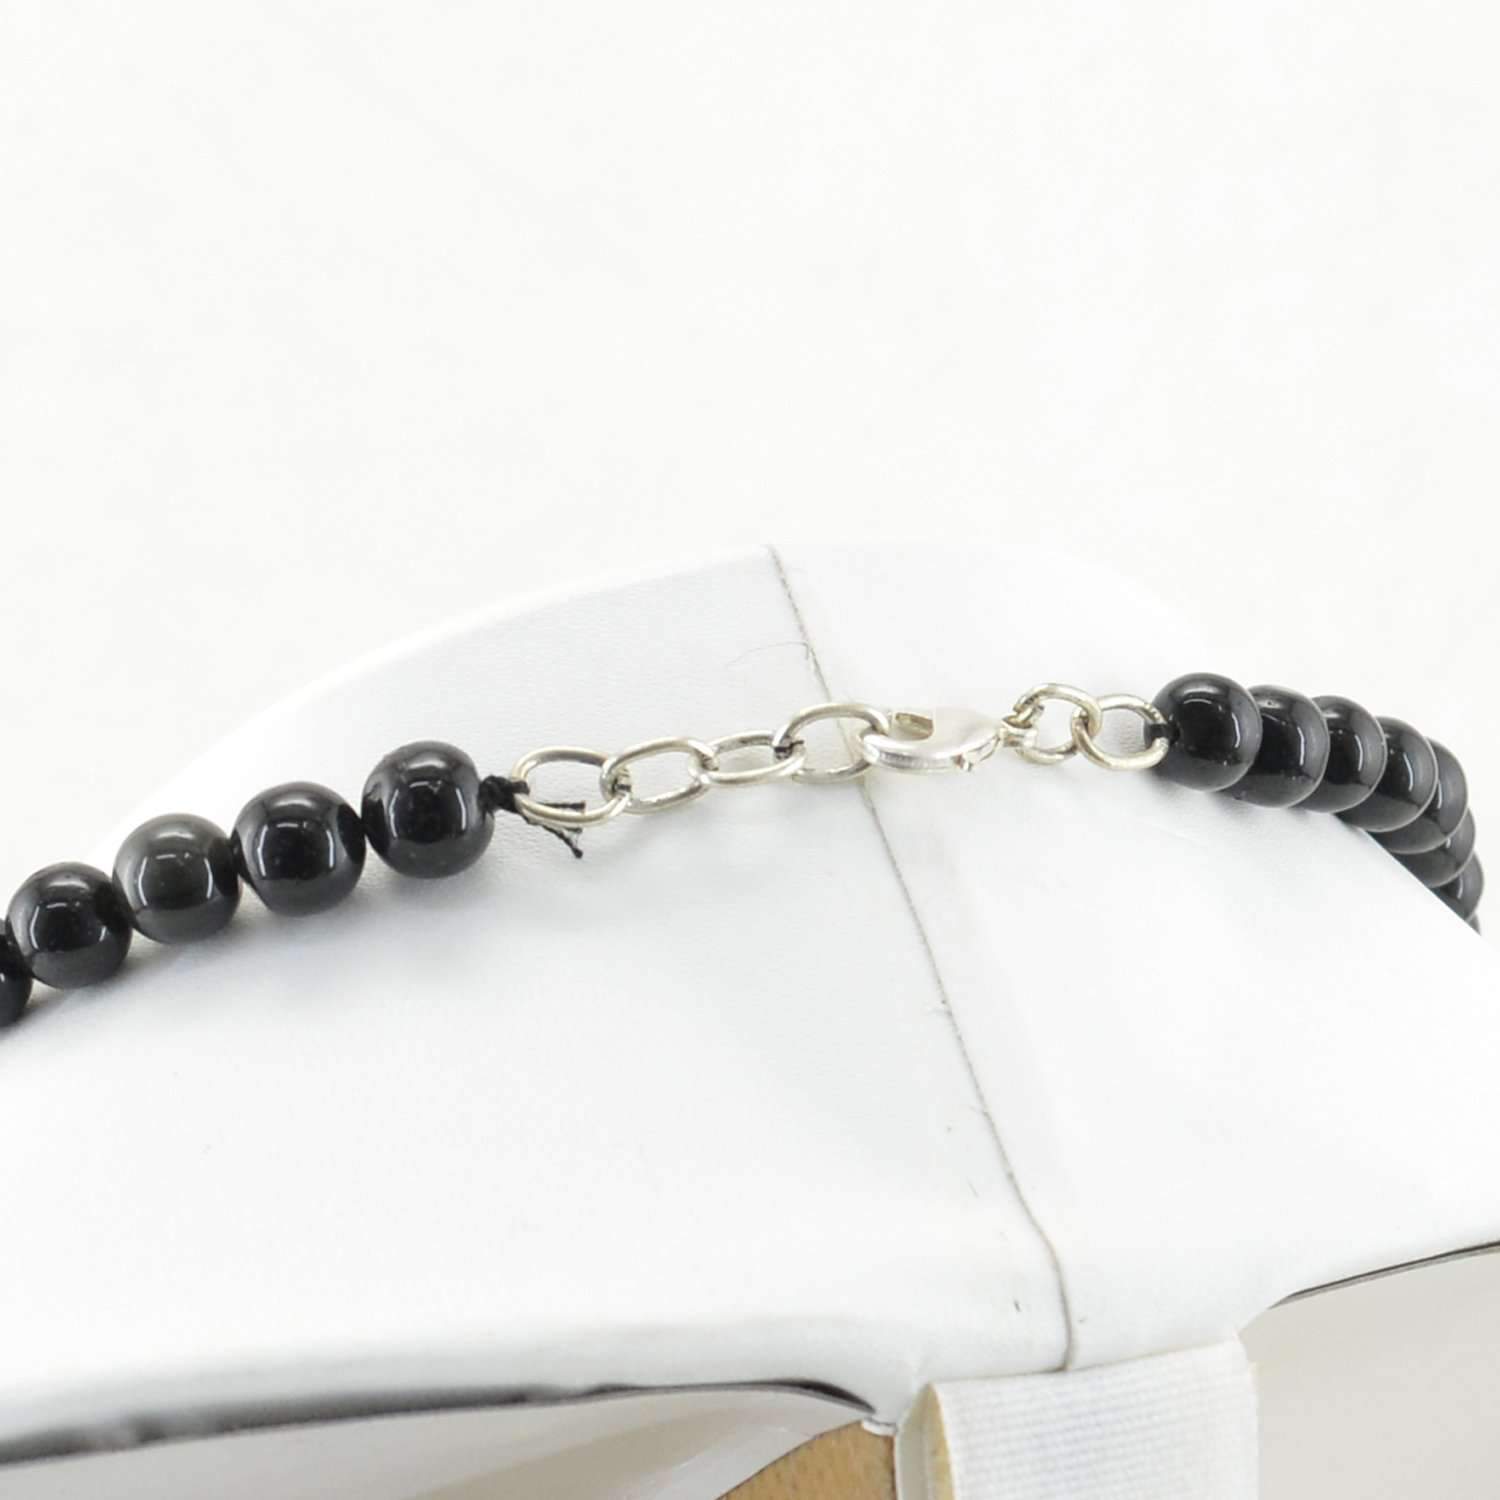 gemsmore:Untreated Black Spinel Necklace Natural Round Shape Beads